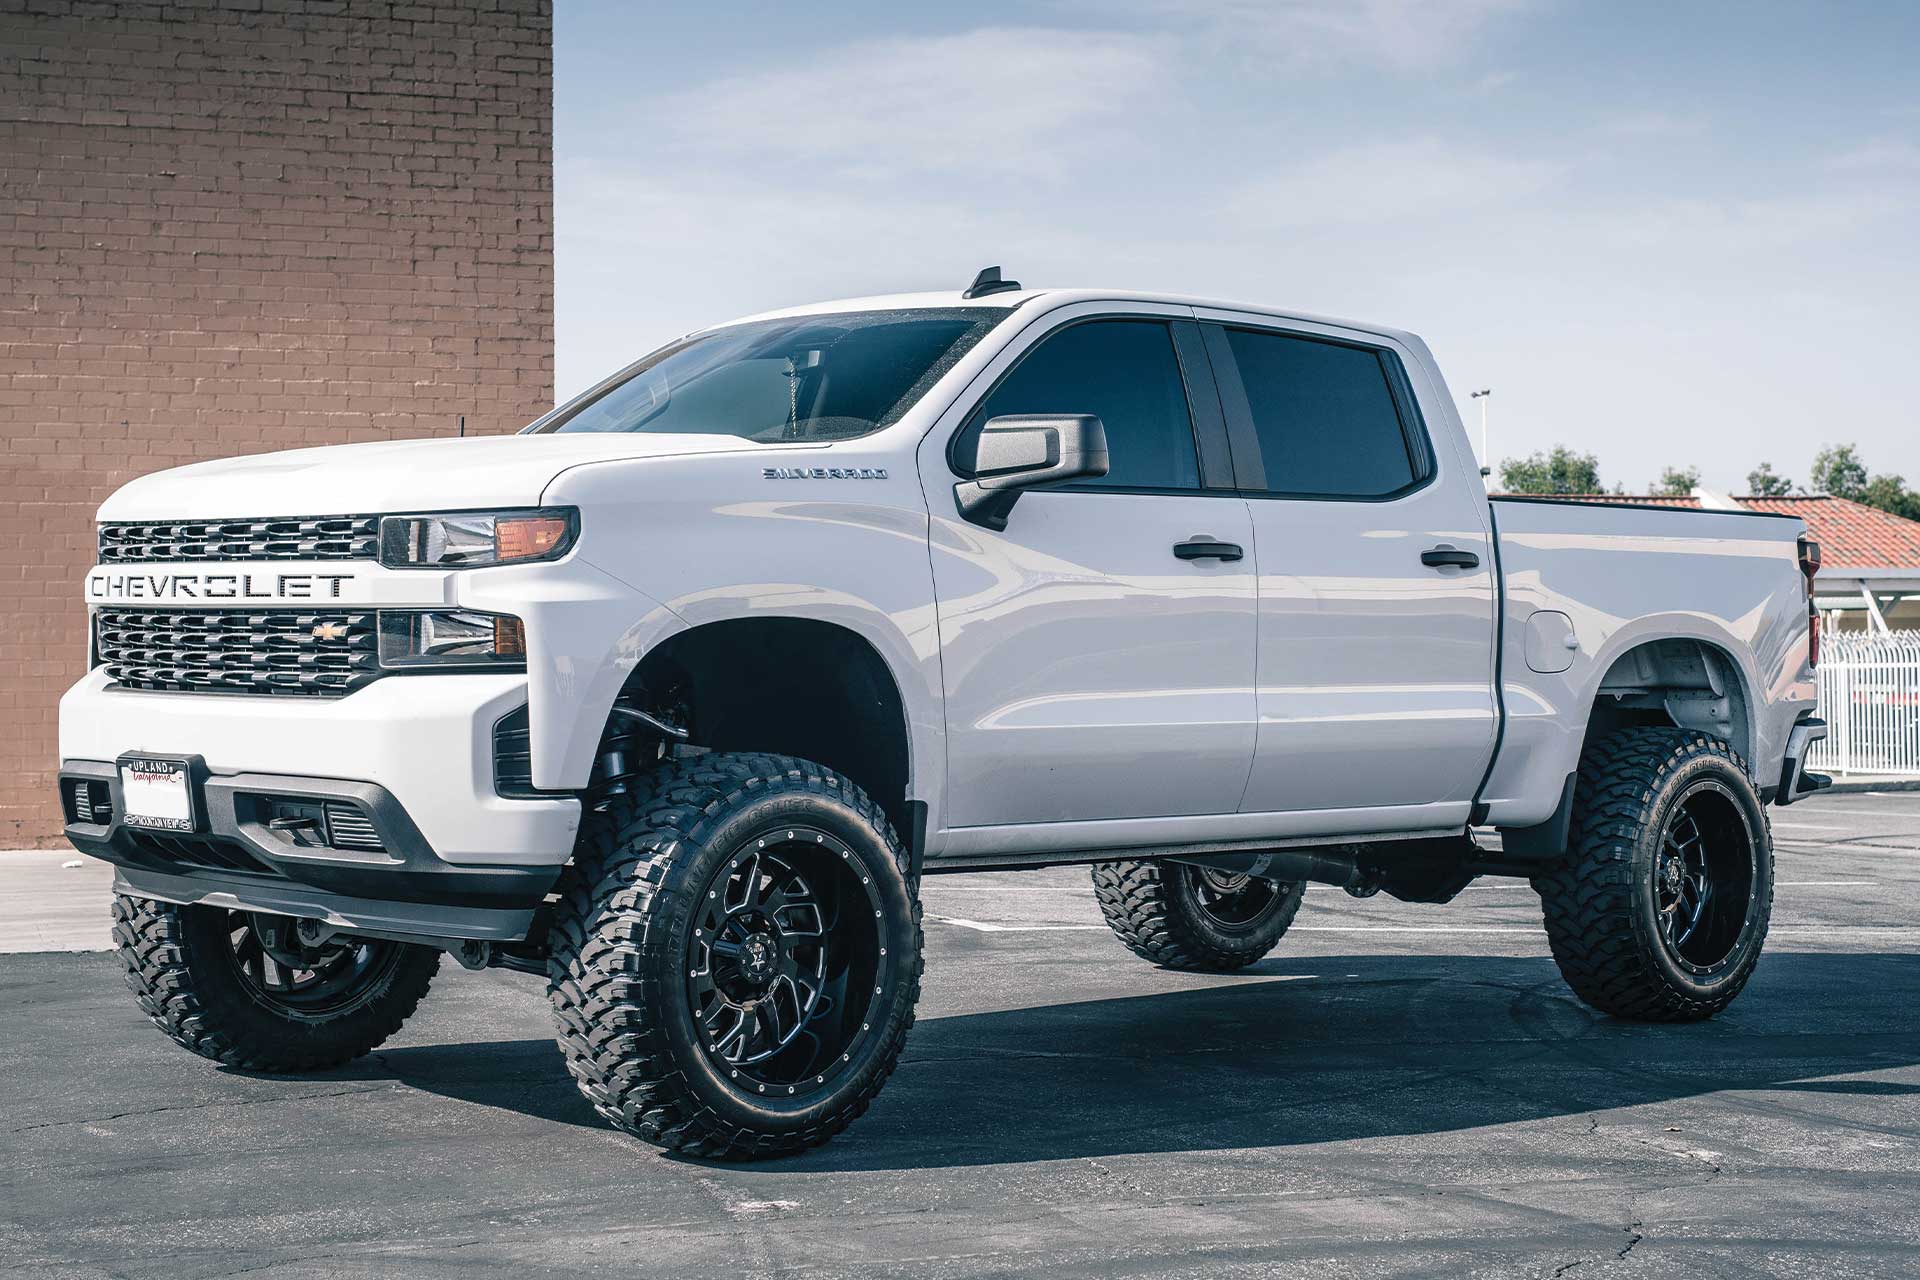 An image of a white Chevy Silverado on RBP Repulsor M/T tires